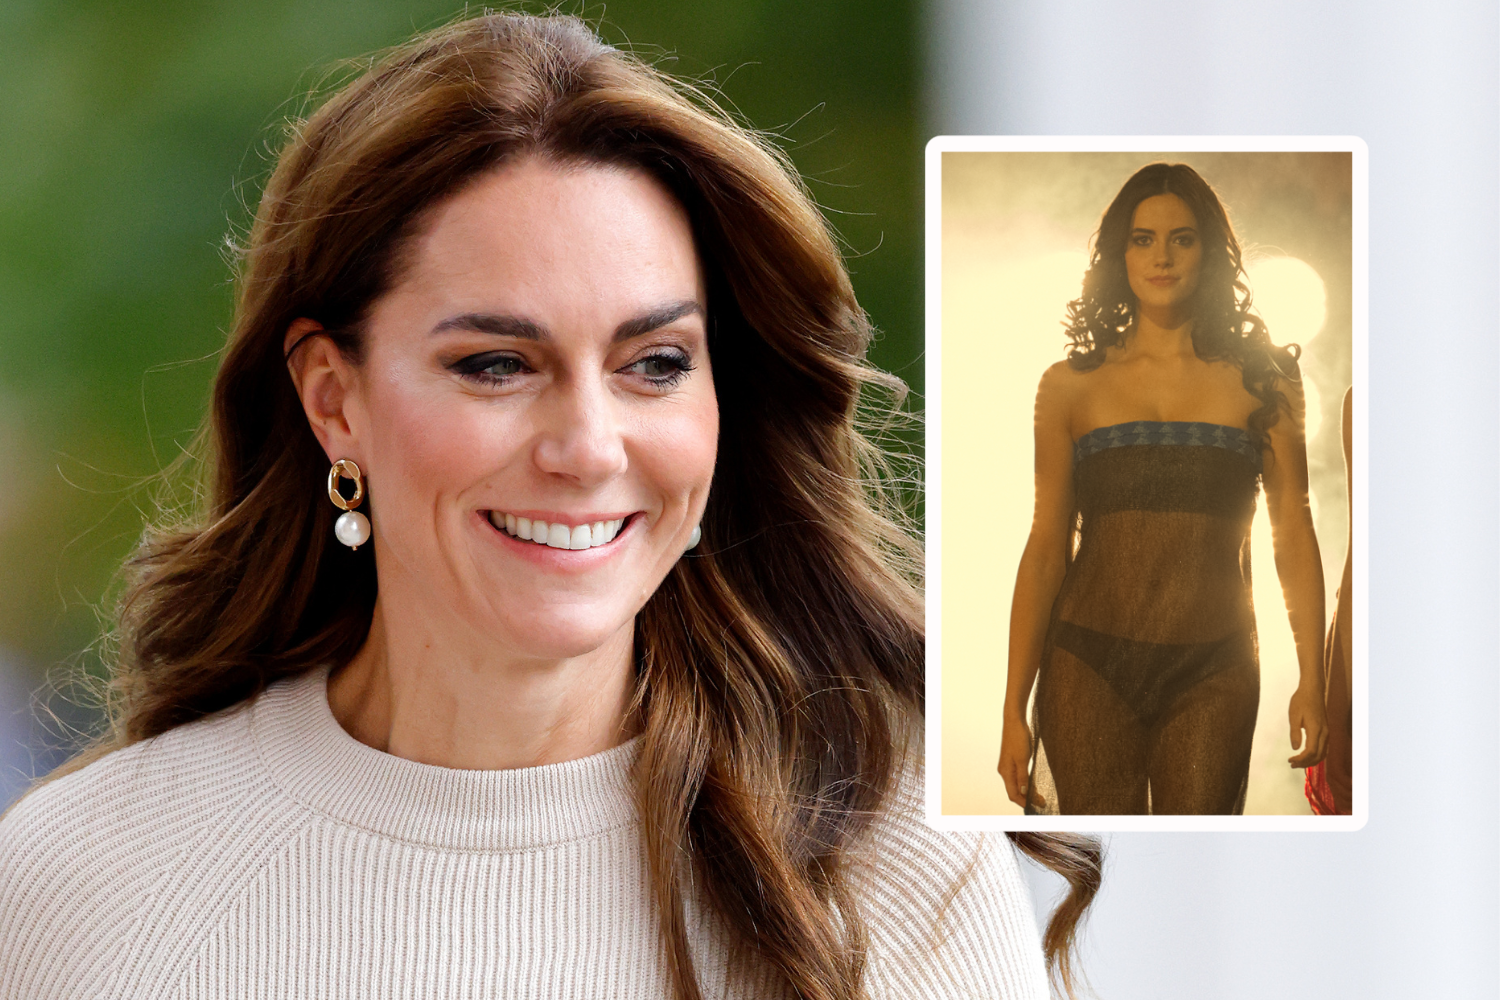 Kate Middleton’s “iconic” dress was “highly provocative”